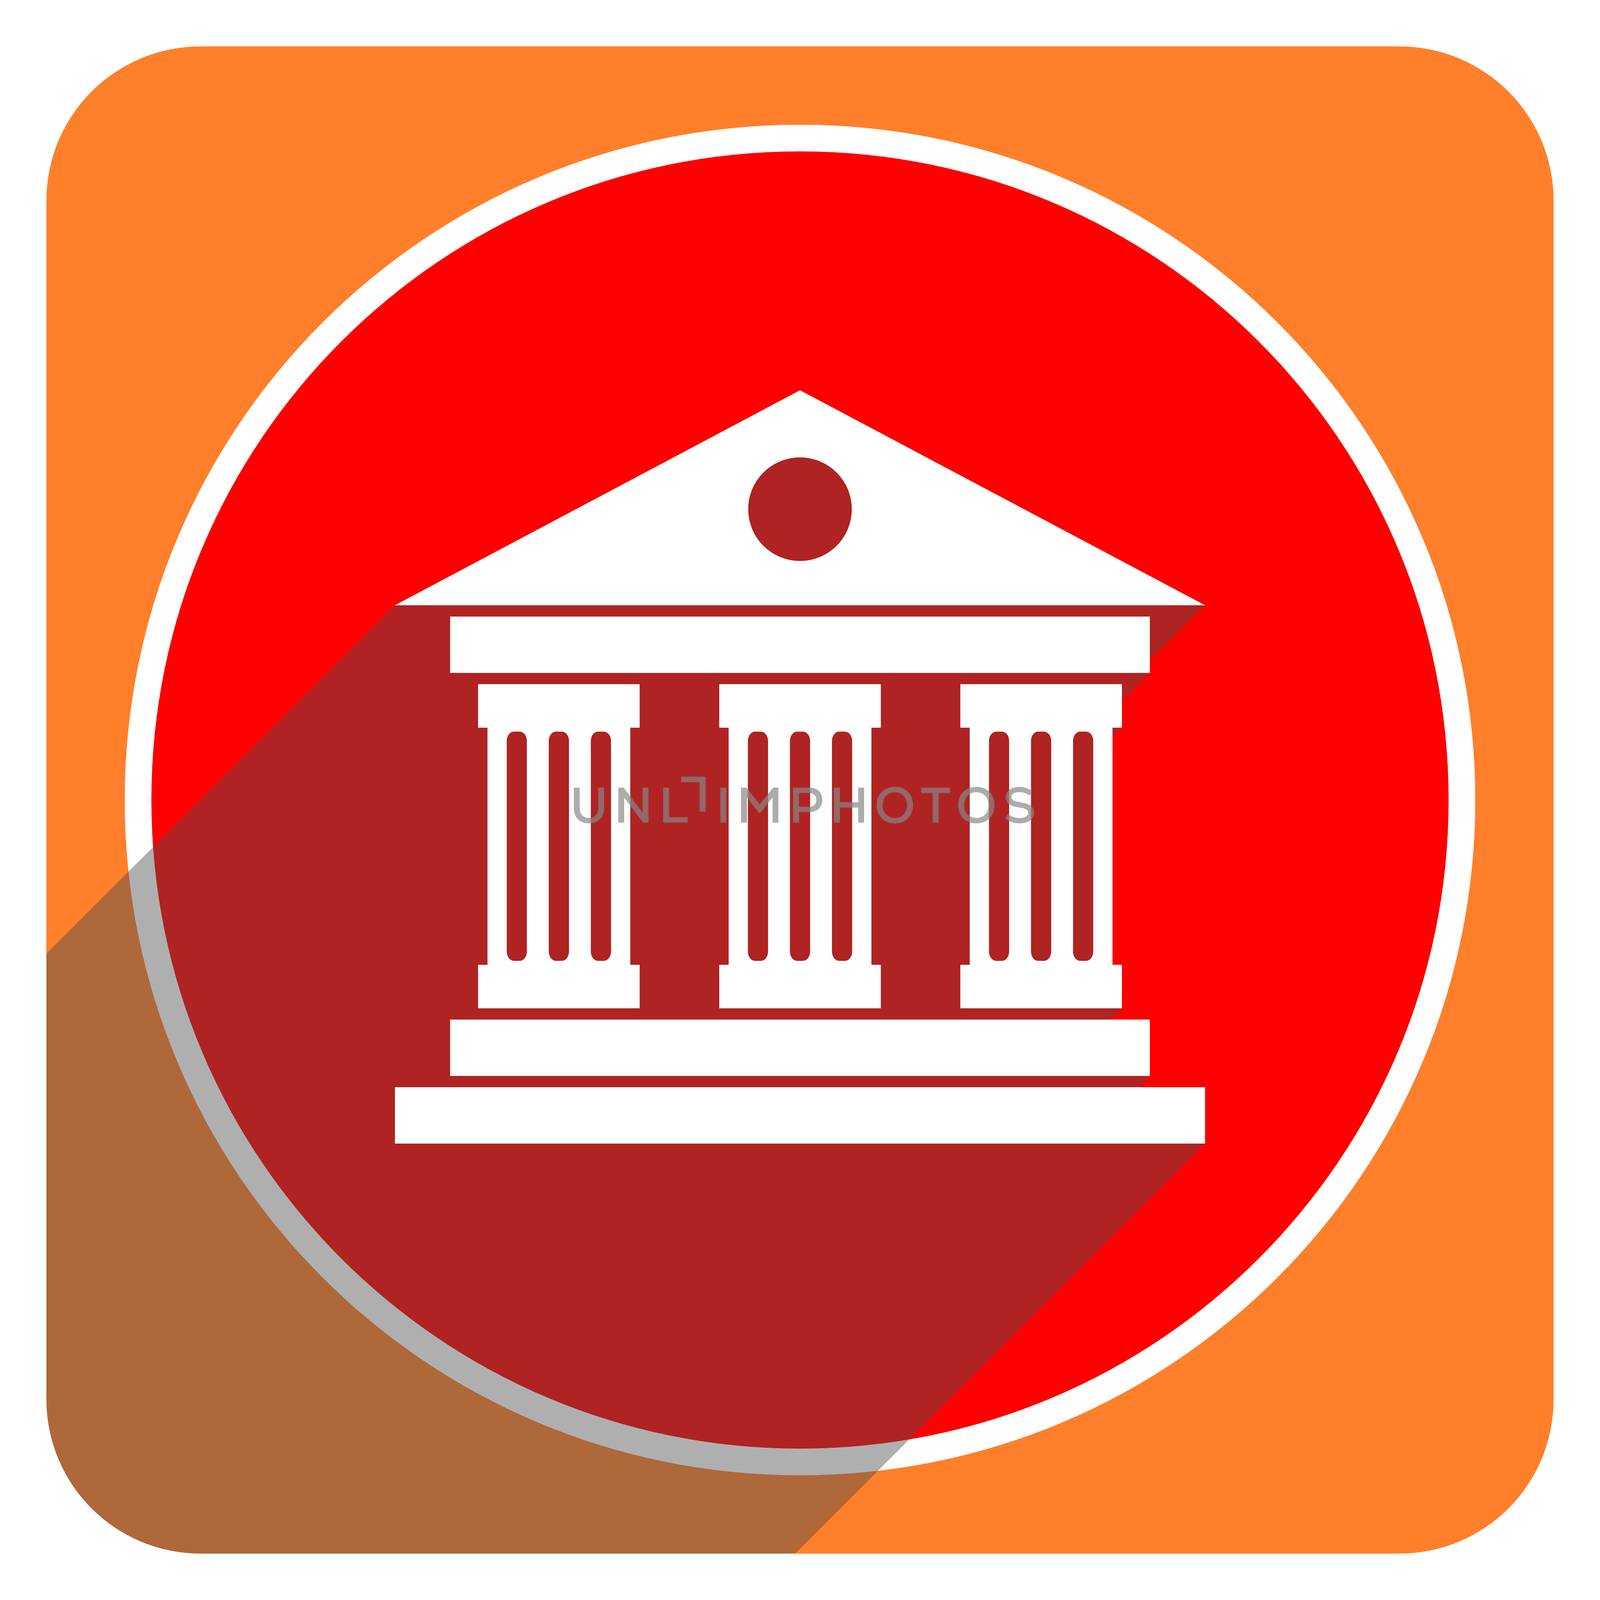 museum red flat icon isolated